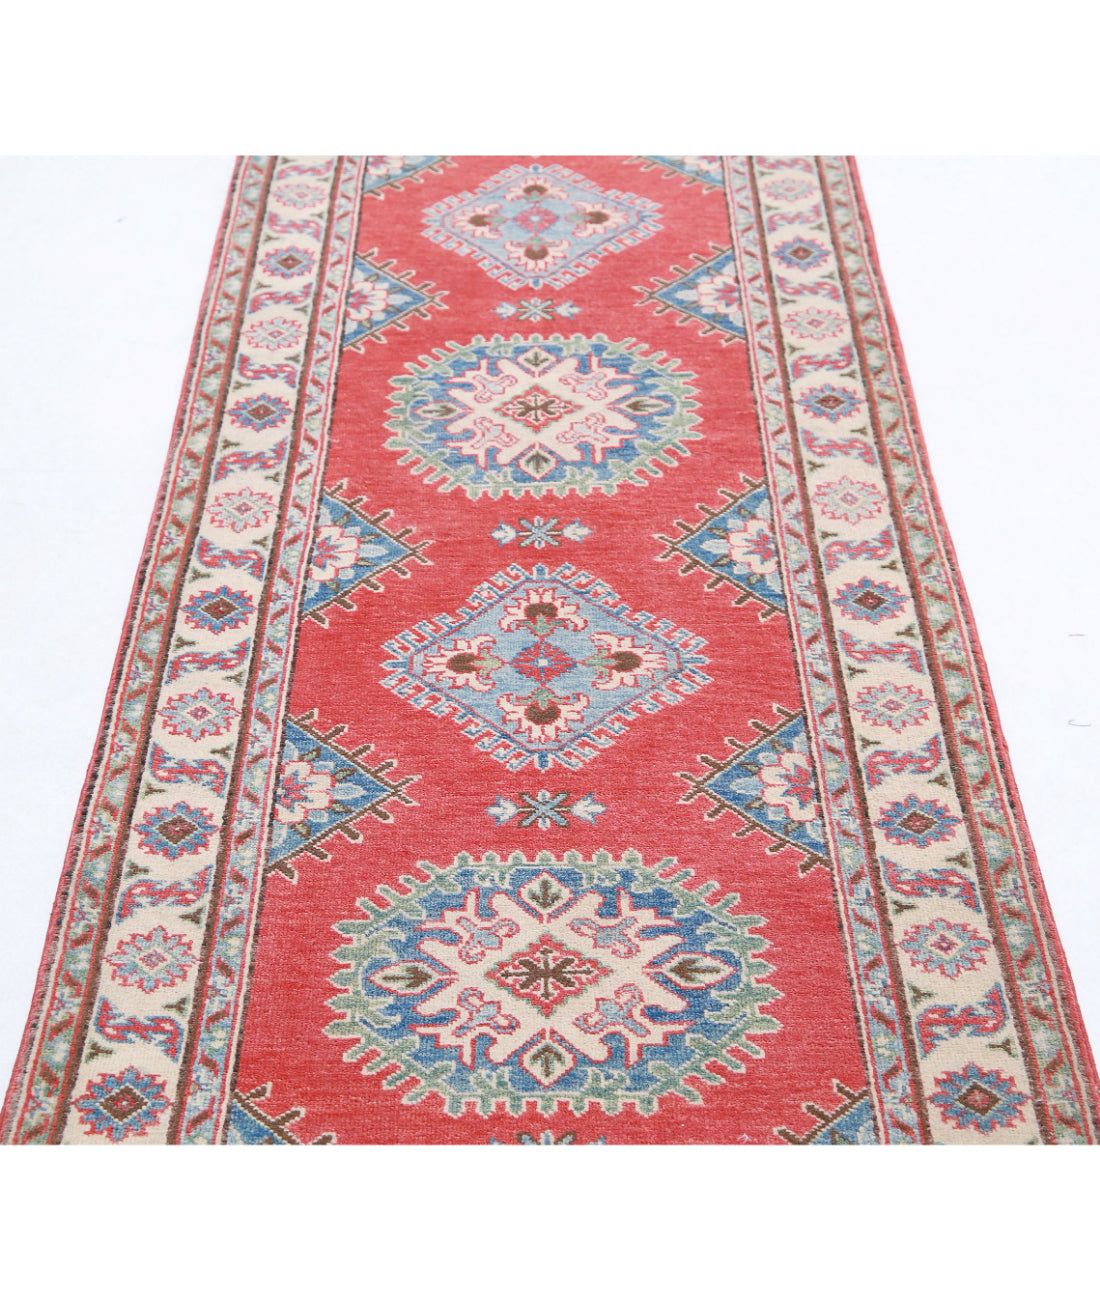 Hand Knotted Tribal Kazak Wool Rug - 2'7'' x 9'7'' 2'7'' x 9'7'' (78 X 288) / Red / Ivory